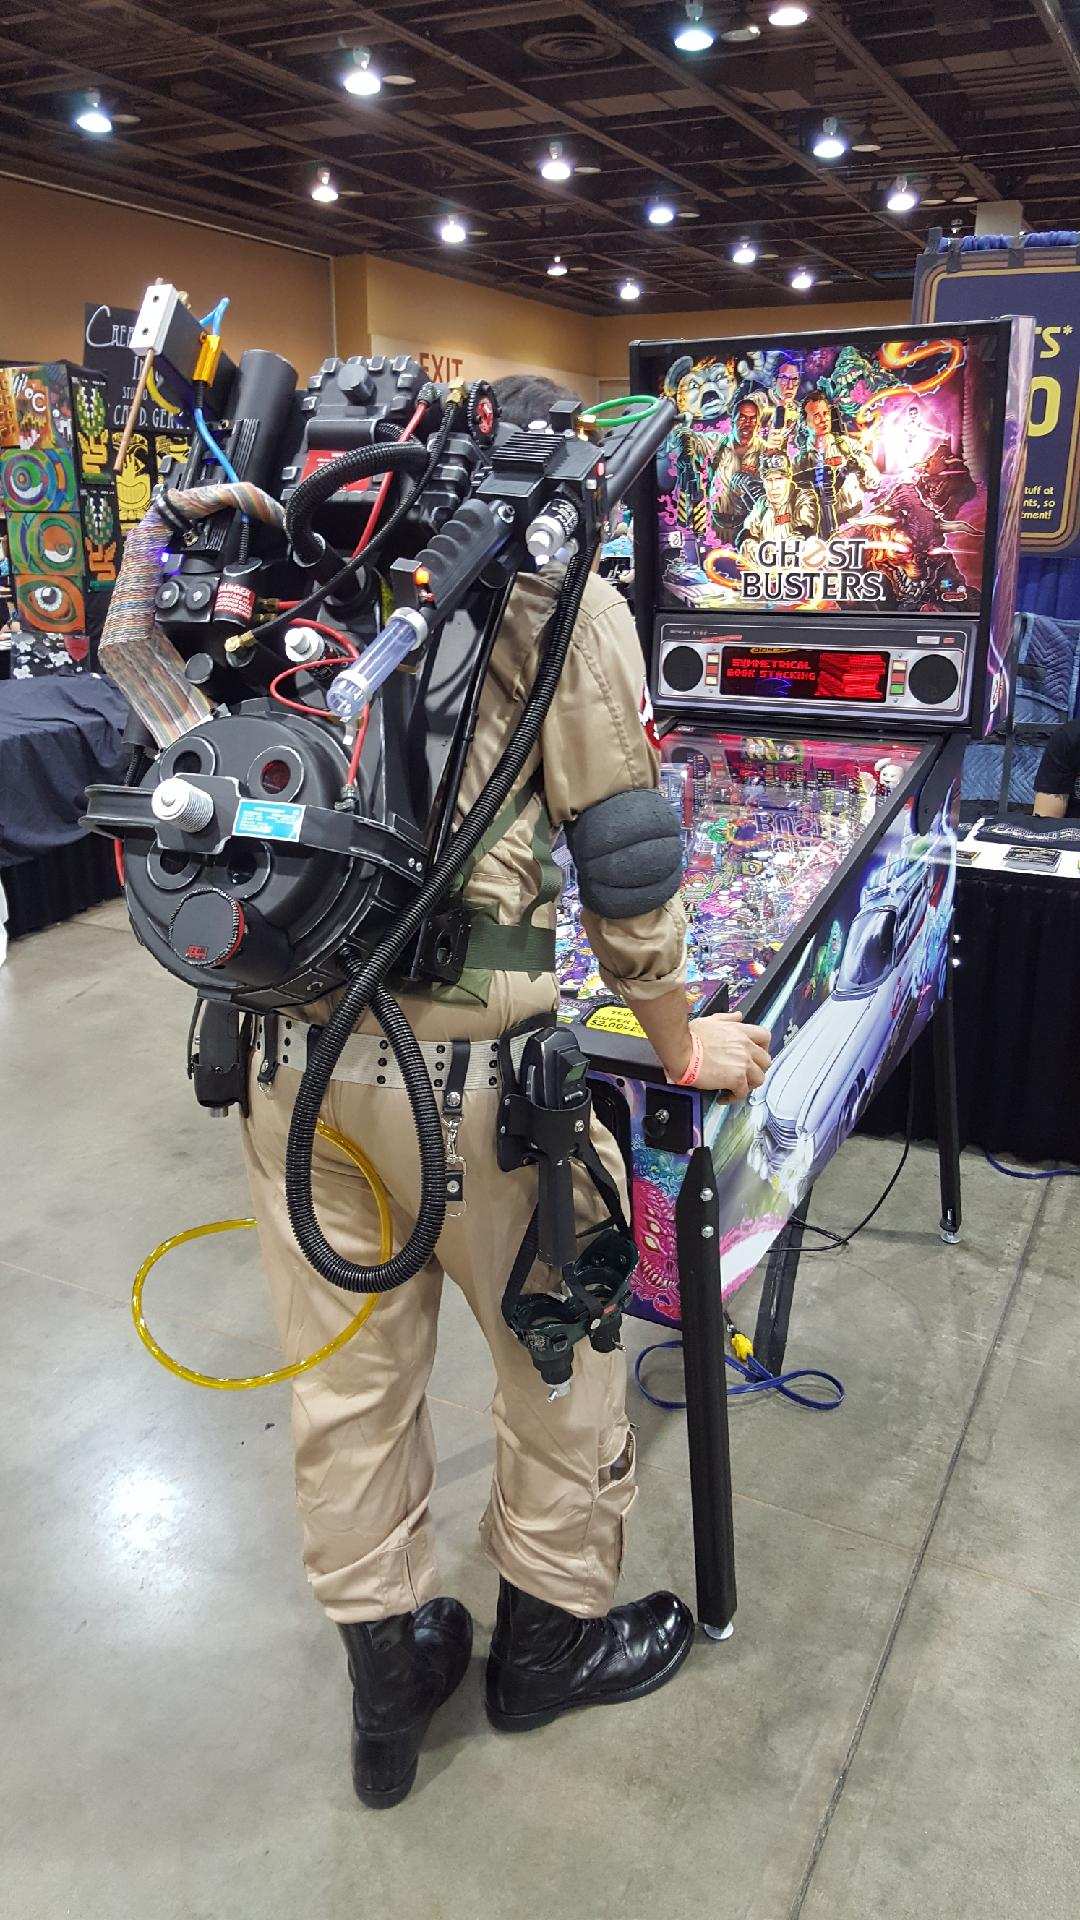 Man dressed in full costume of Ghostbusters casually playing a pinball machine about ghostbusters.